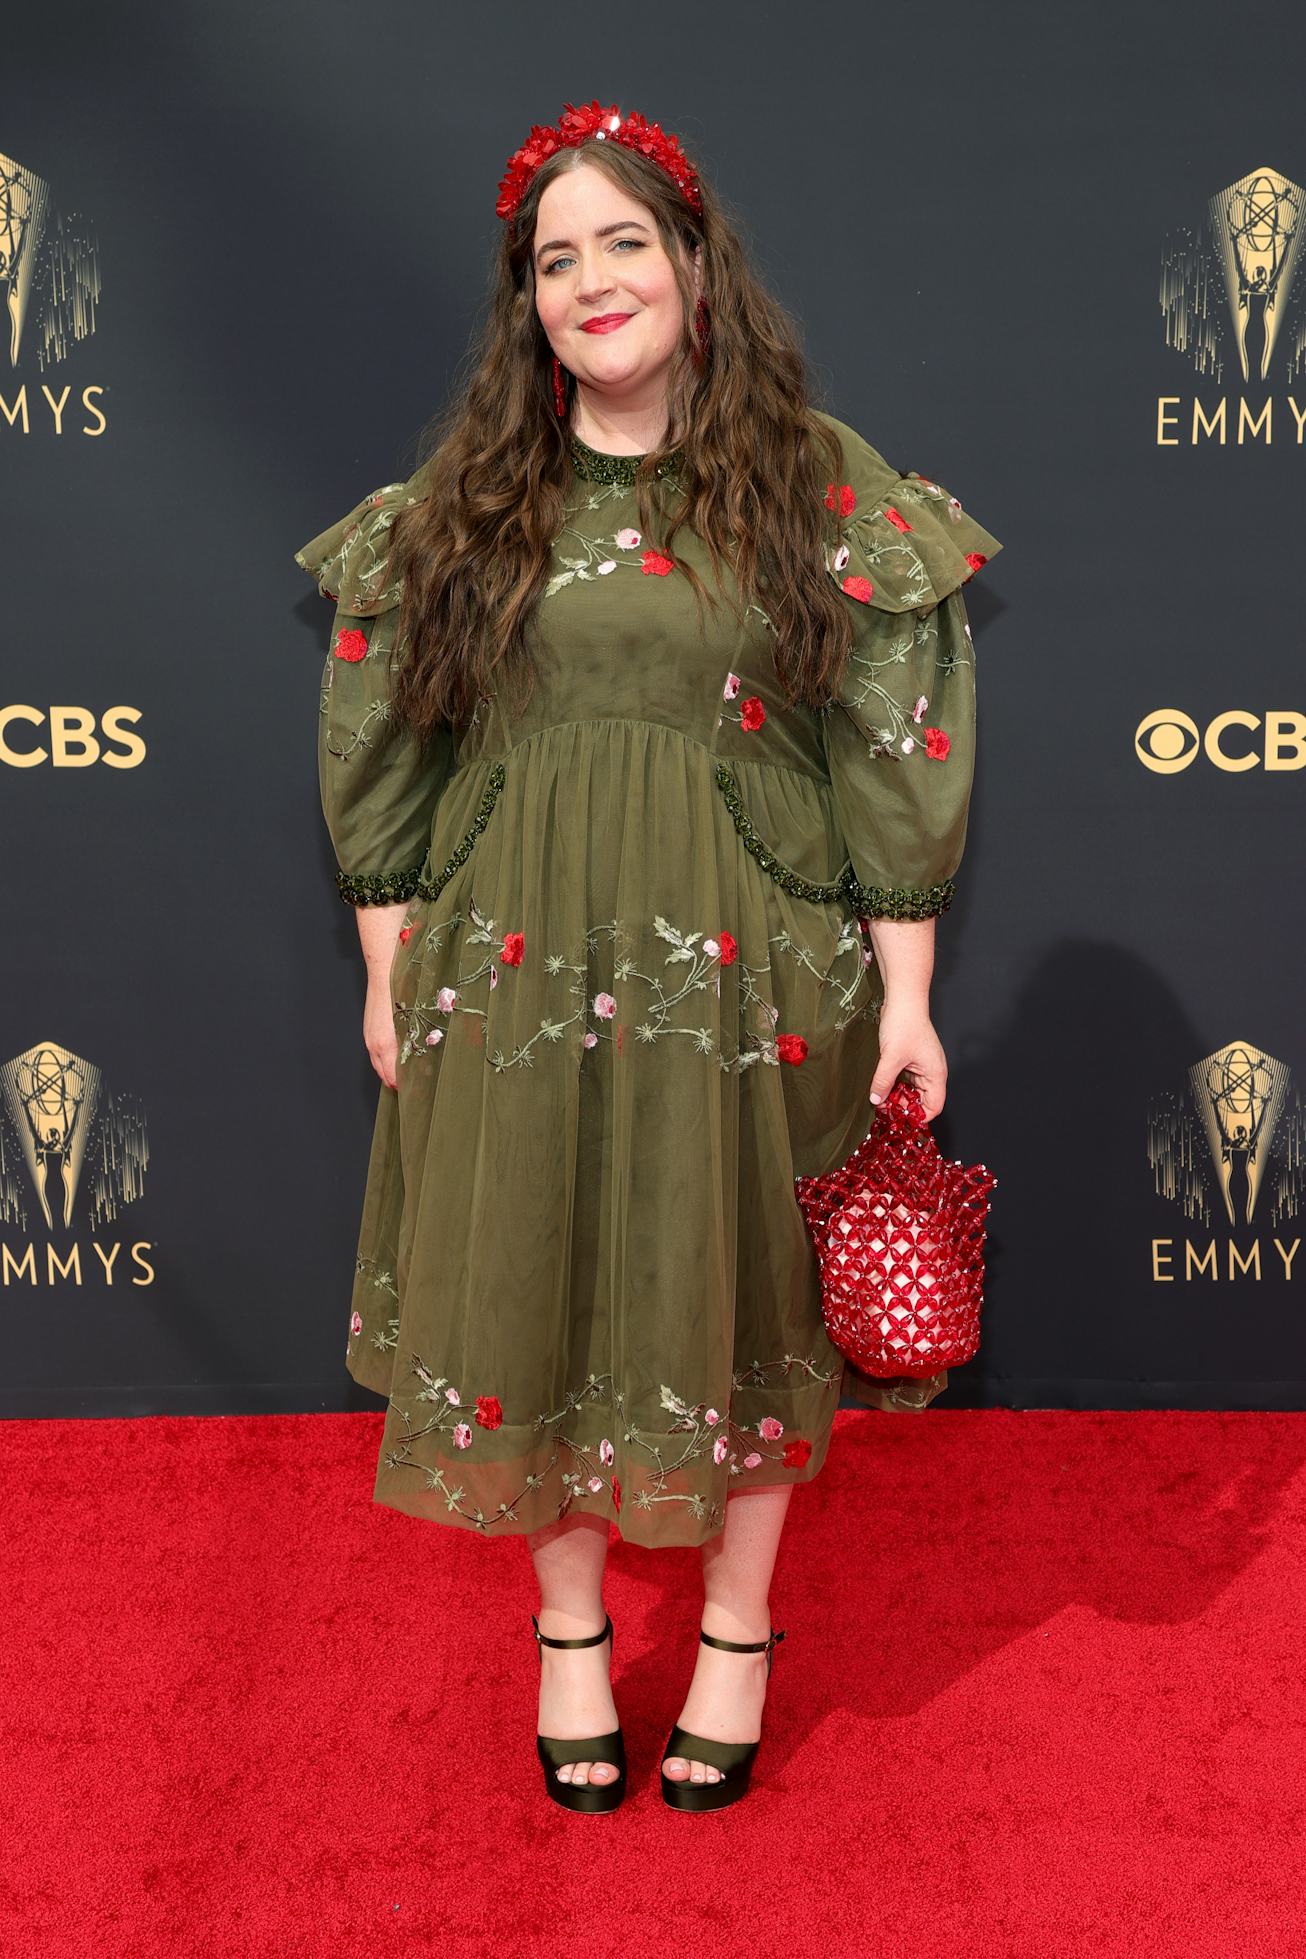 LOS ANGELES, CALIFORNIA - SEPTEMBER 19: Aidy Bryant attends the 73rd Primetime Emmy Awards at L.A. L...